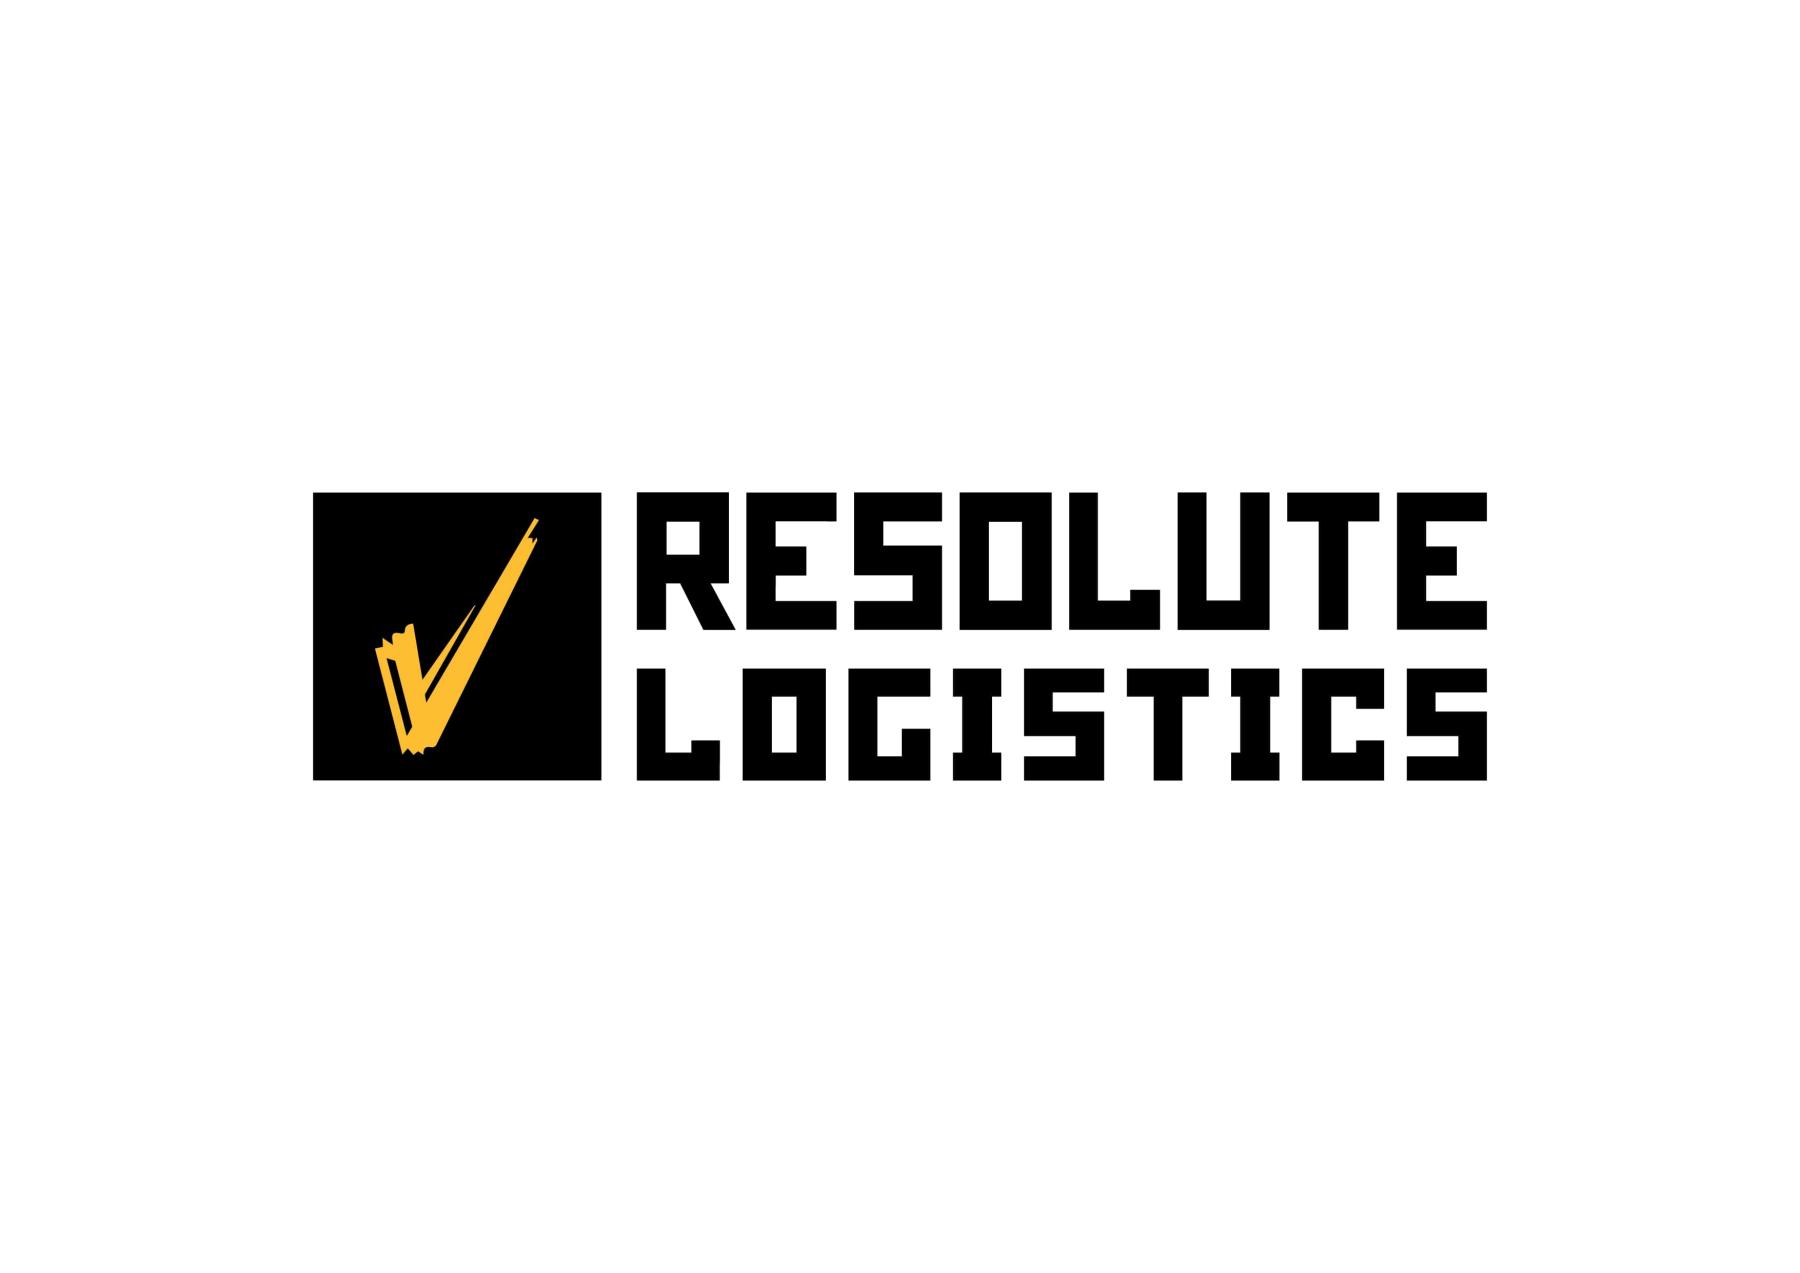 How to get loads for trucks with Resolute Ligistics